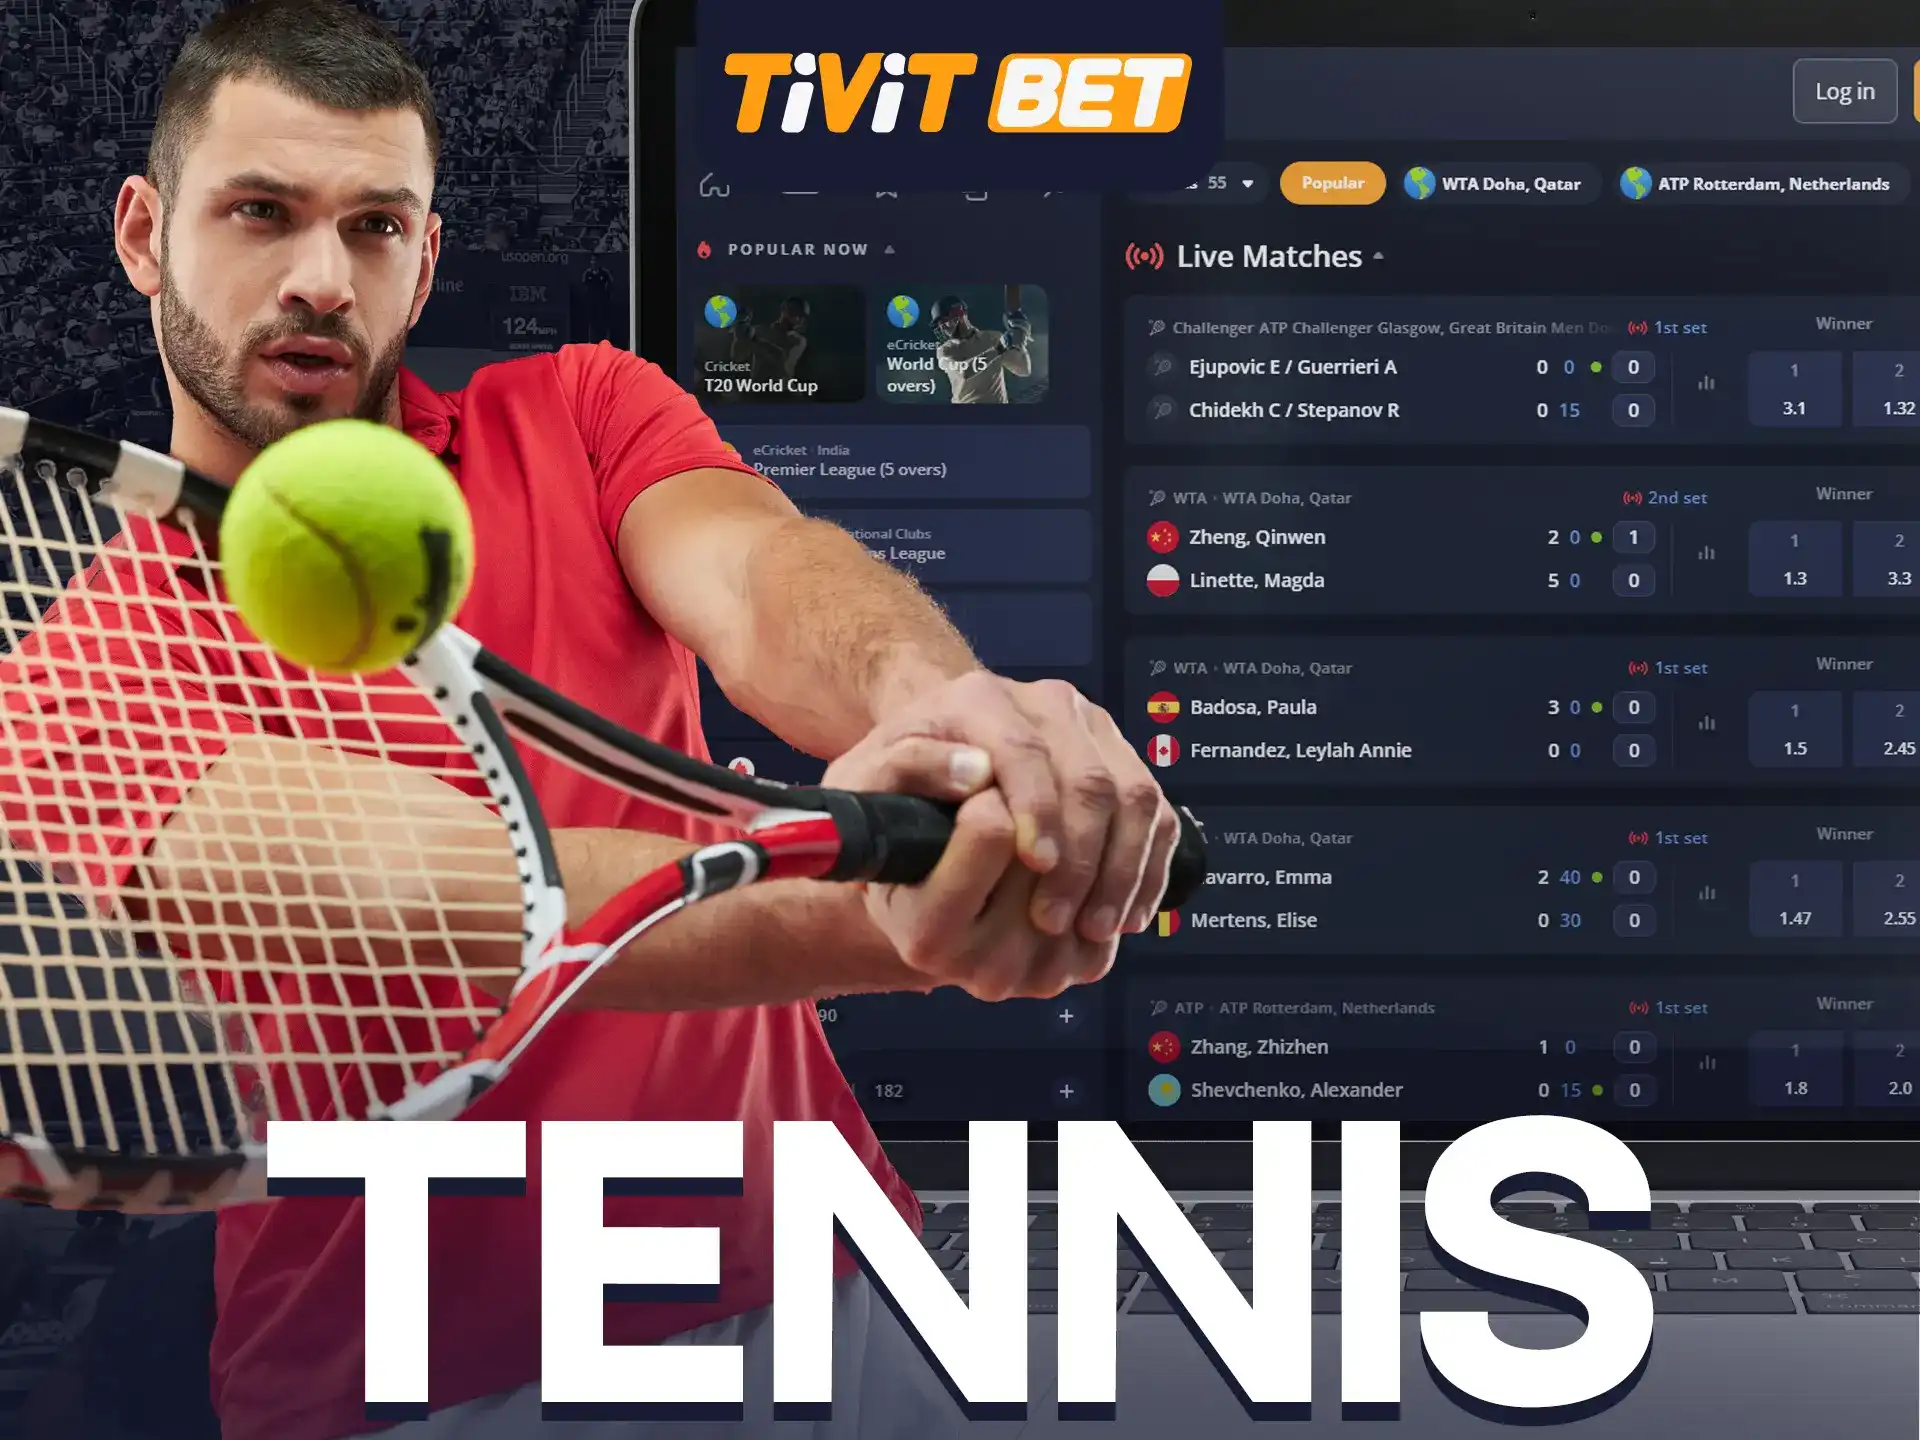 Fans of the tennis game can place a bet with Tivit Bet.